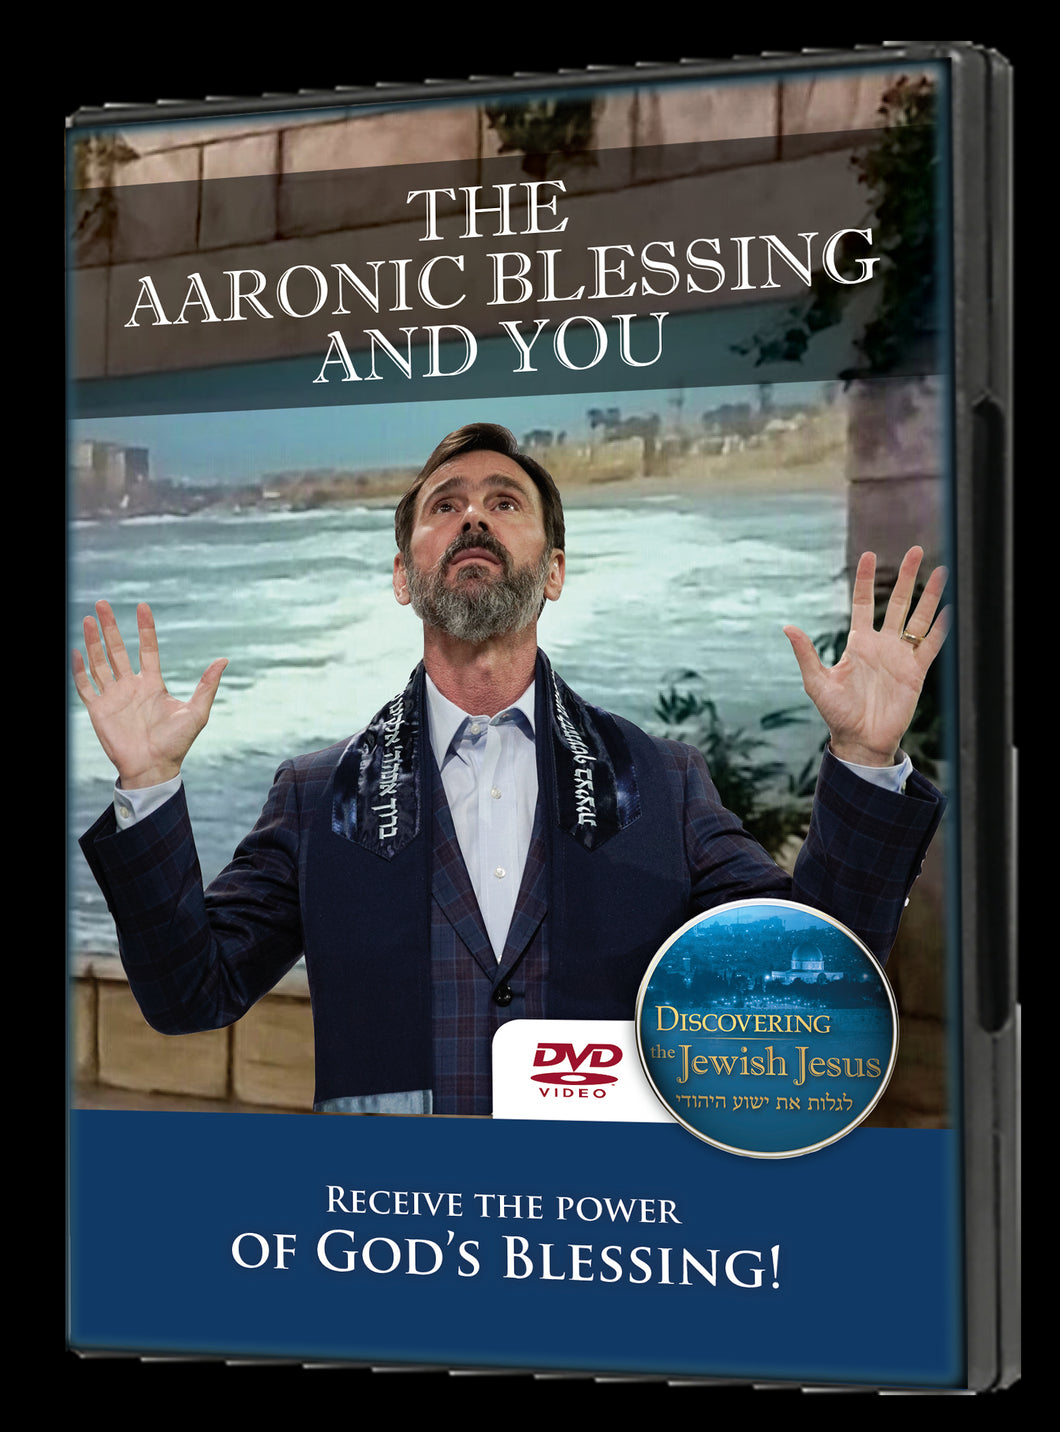 The Aaronic Blessing and You